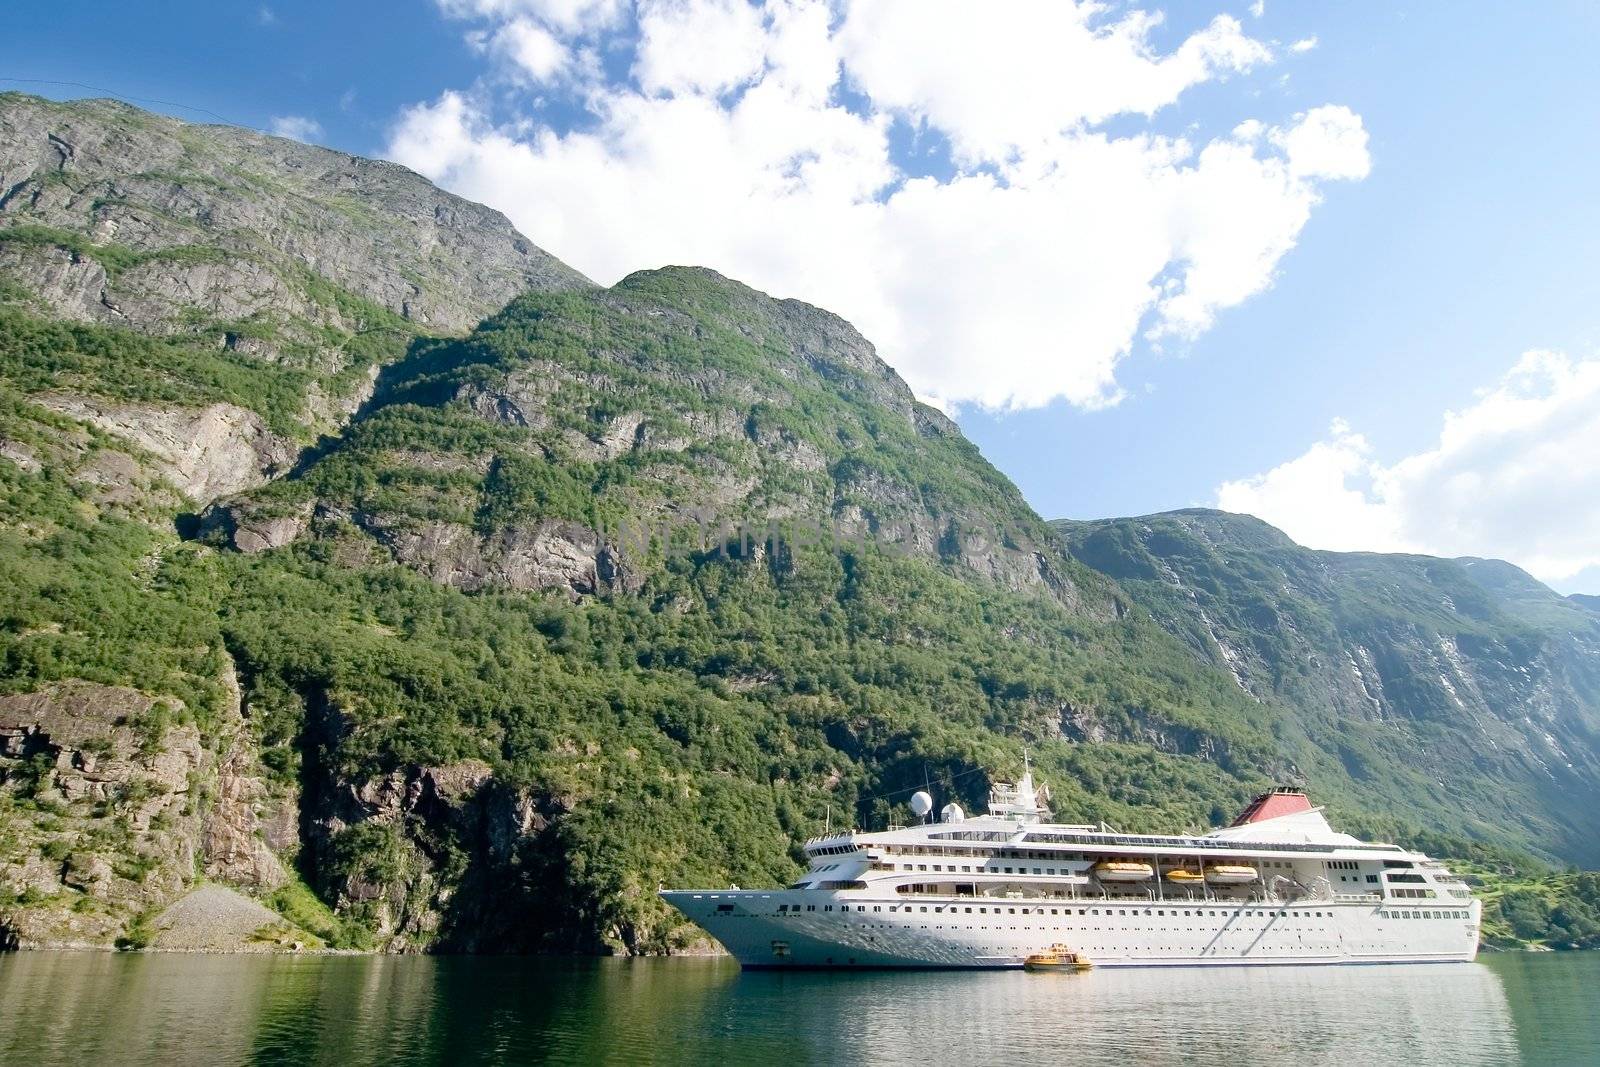 Cruise boat on the Sognefjord near Gudvangen in the western area of Norway.